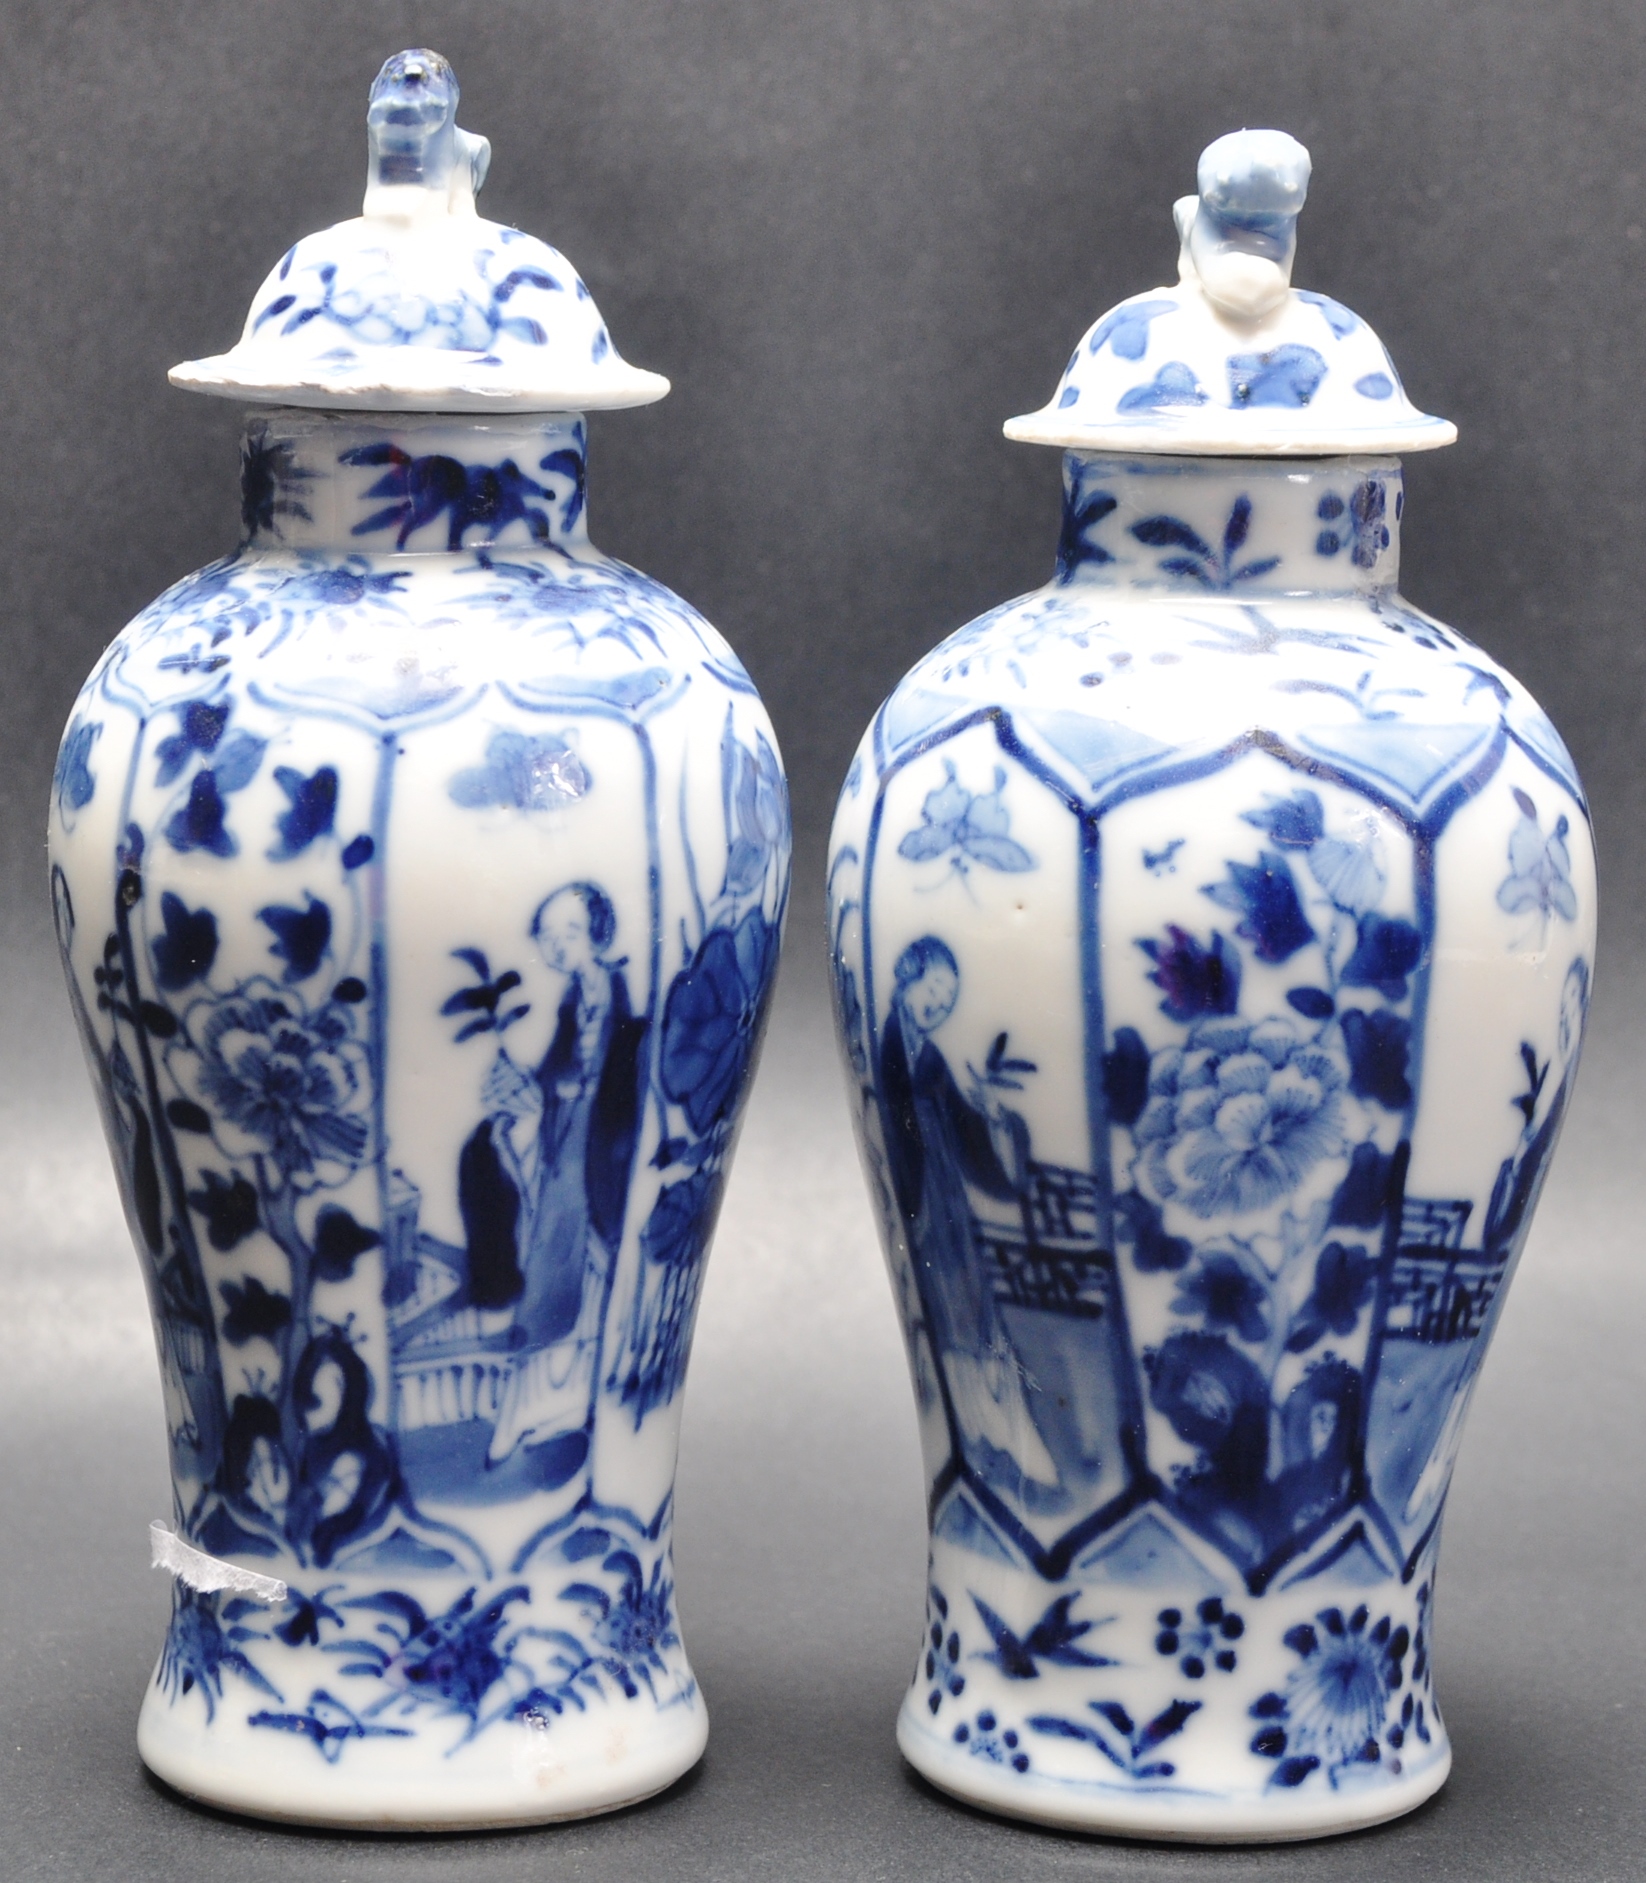 PAIR OF EARLY 20TH CENTURY CHINESE BLUE AND WHITE VASES - Image 2 of 5